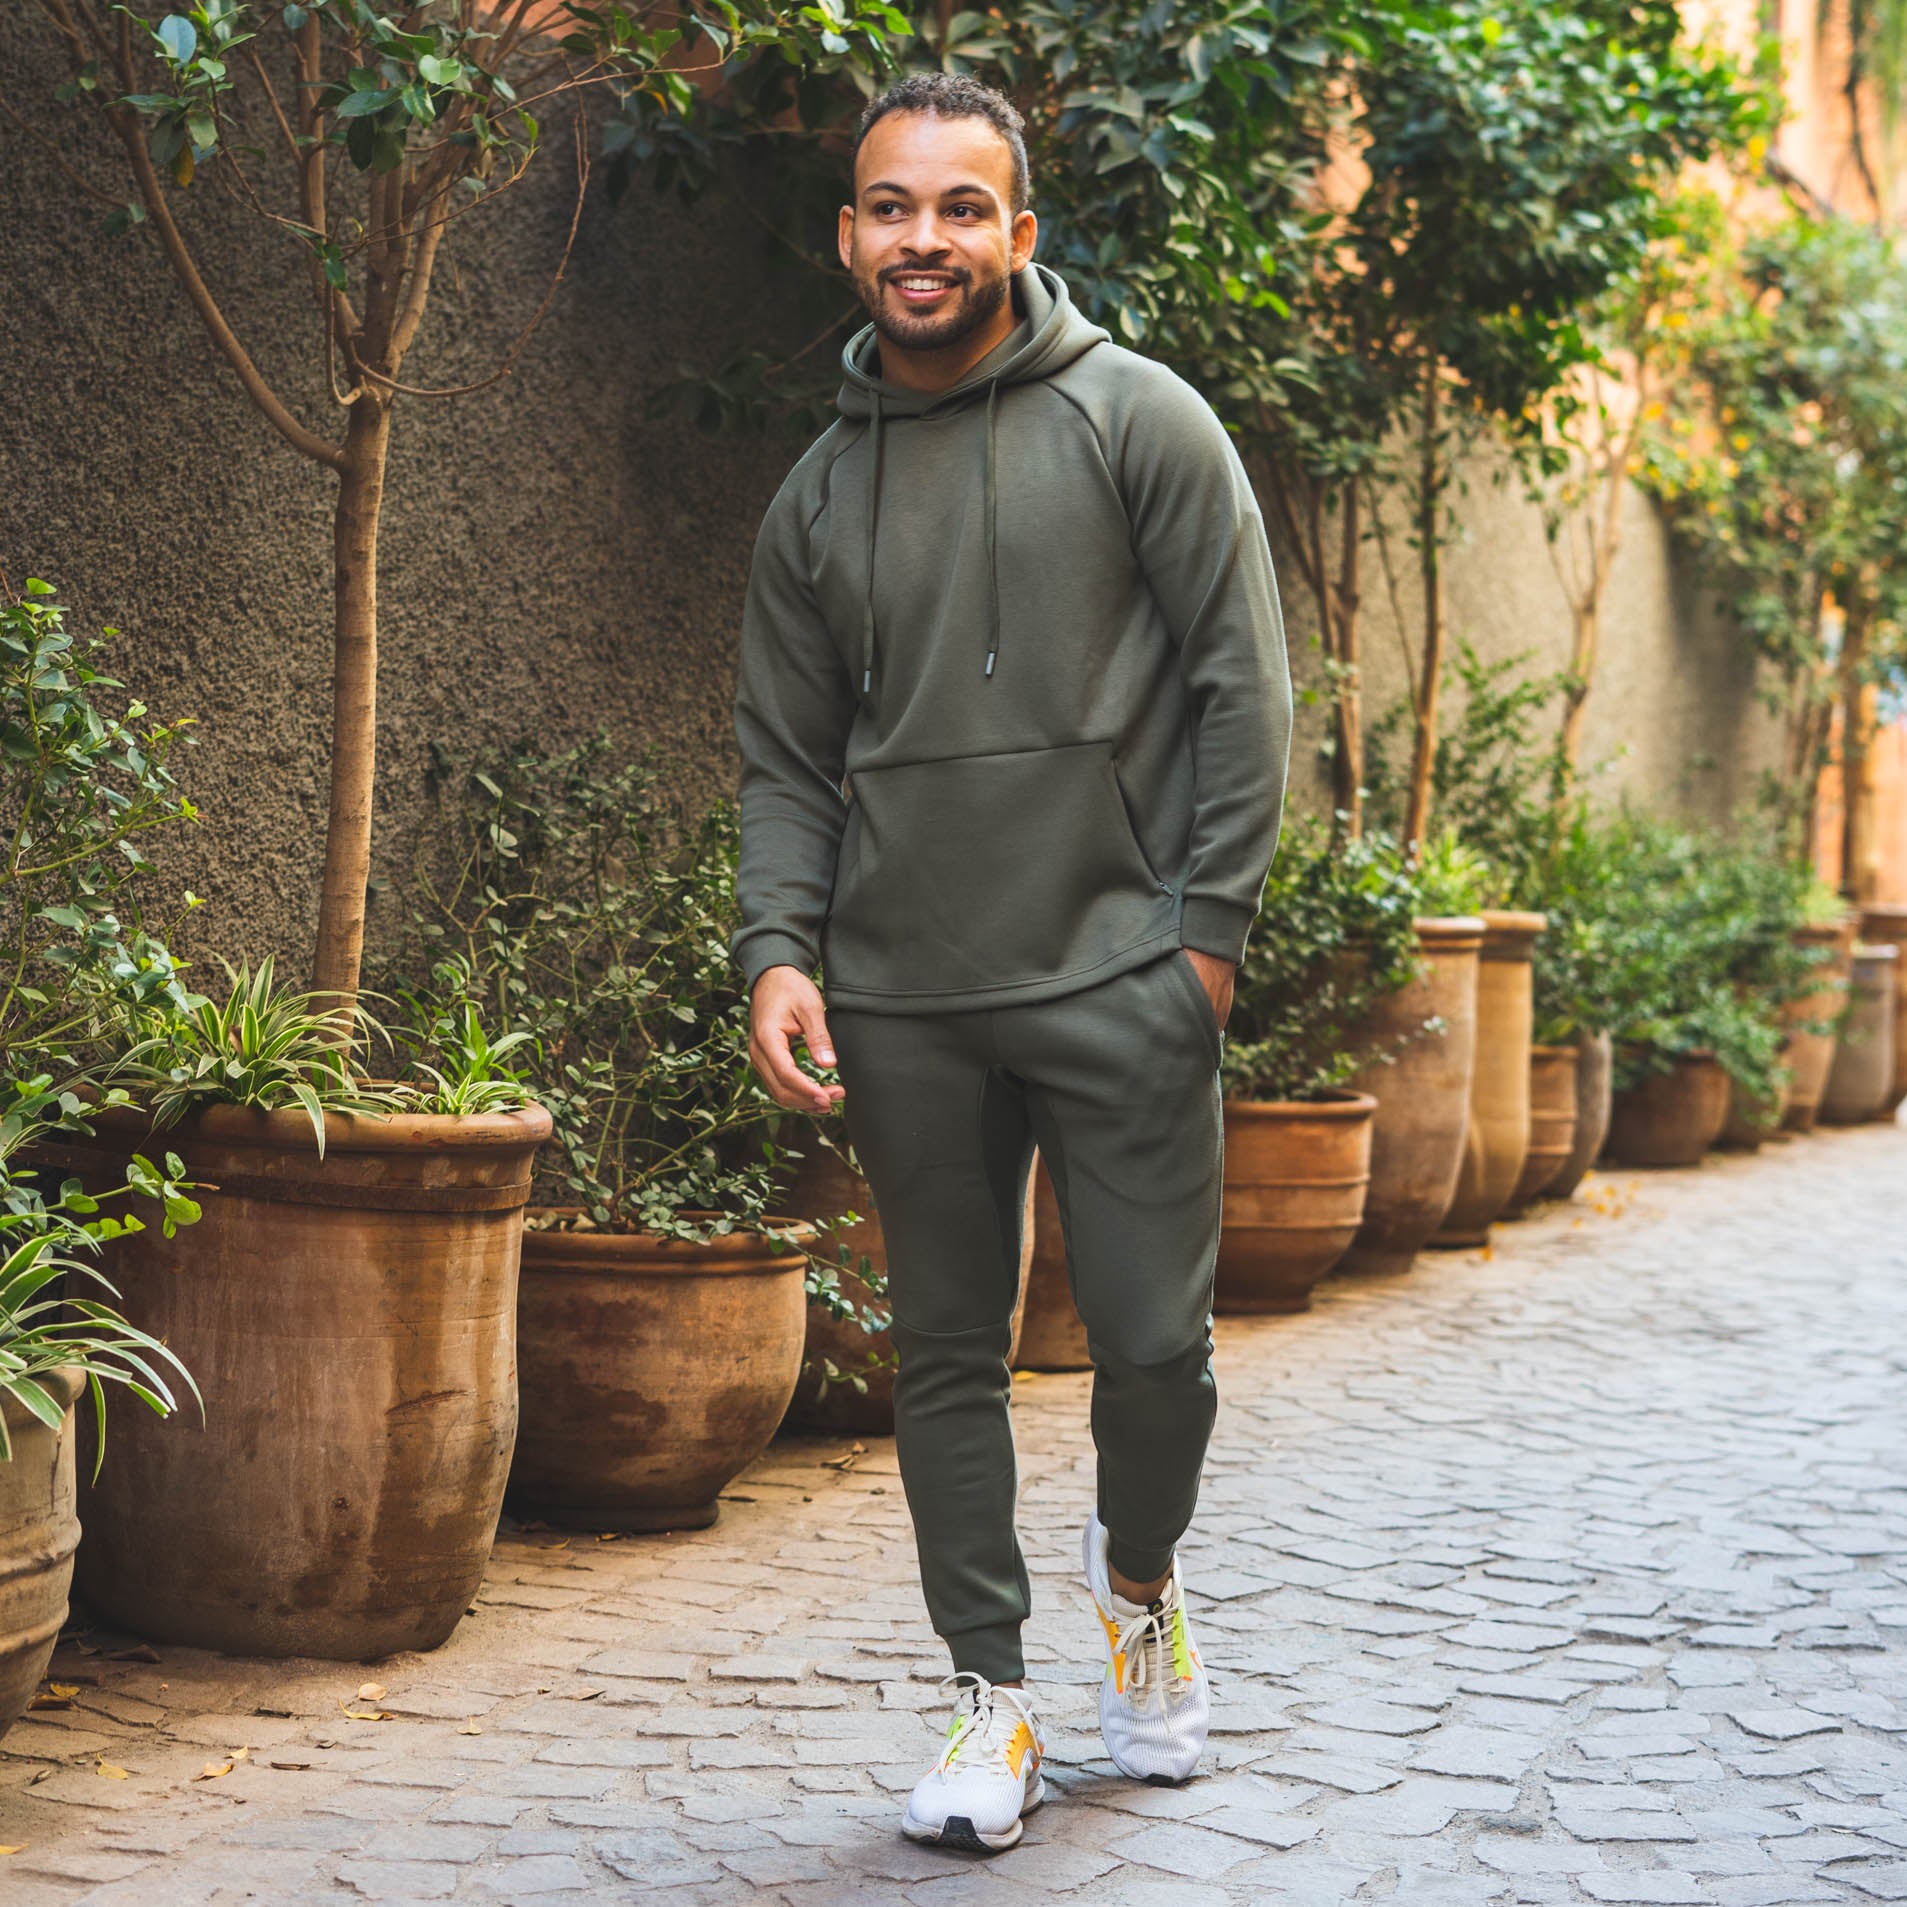 The image shows a man walking outdoors in a narrow pathway lined with potted plants. He is wearing an olive green hoodie and matching jogger pants, paired with white sneakers featuring yellow accents. The man has a cheerful expression and is walking with his hands in his pockets. The background includes a wall with greenery and tall plants in large terracotta pots, creating a serene and natural atmosphere.